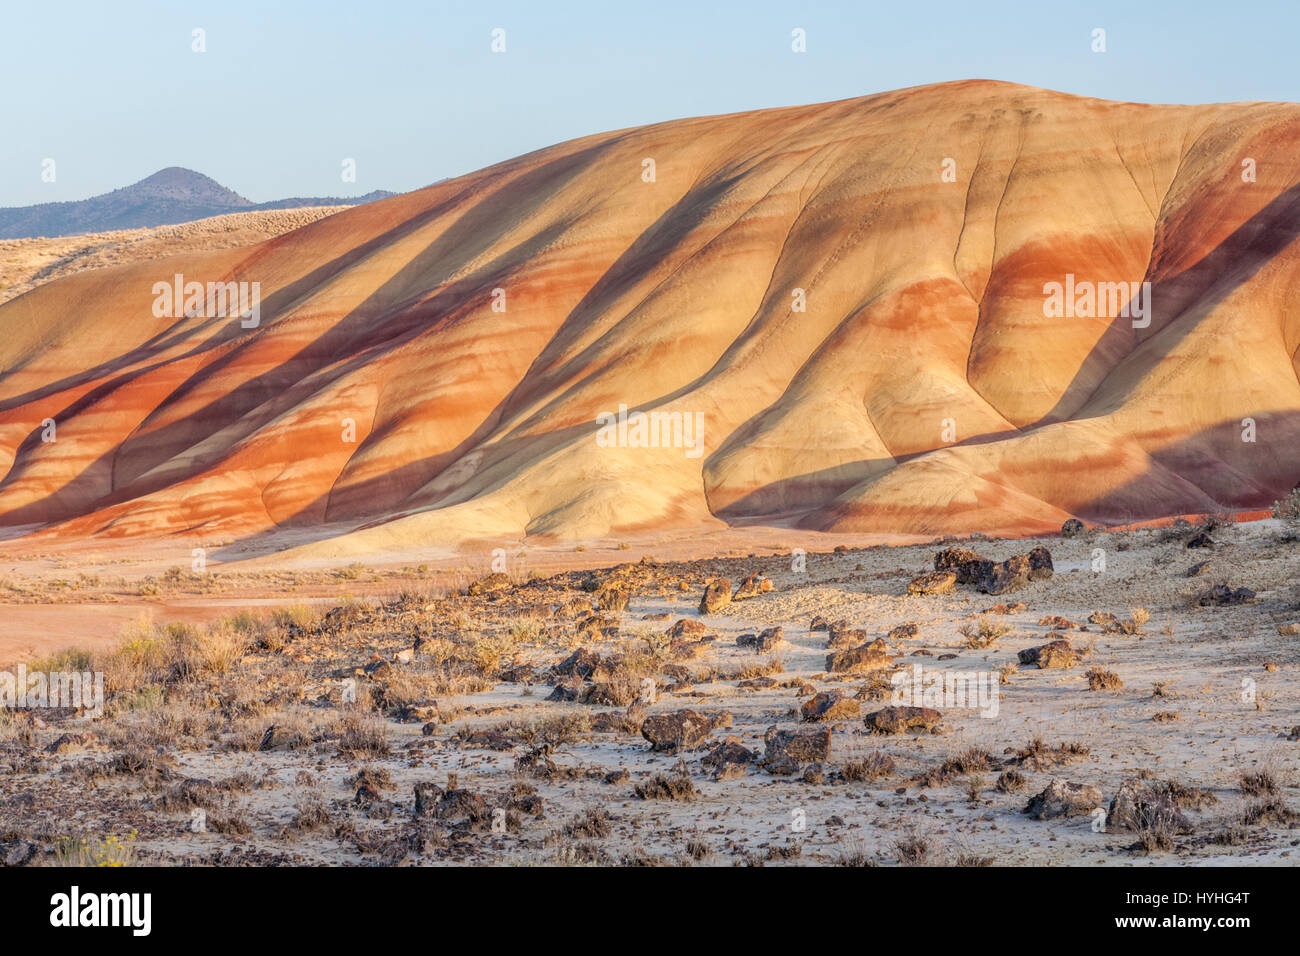 Sunset detail of Painted Hills, John Day Fossil Beds National Monument, Oregon. Stock Photo